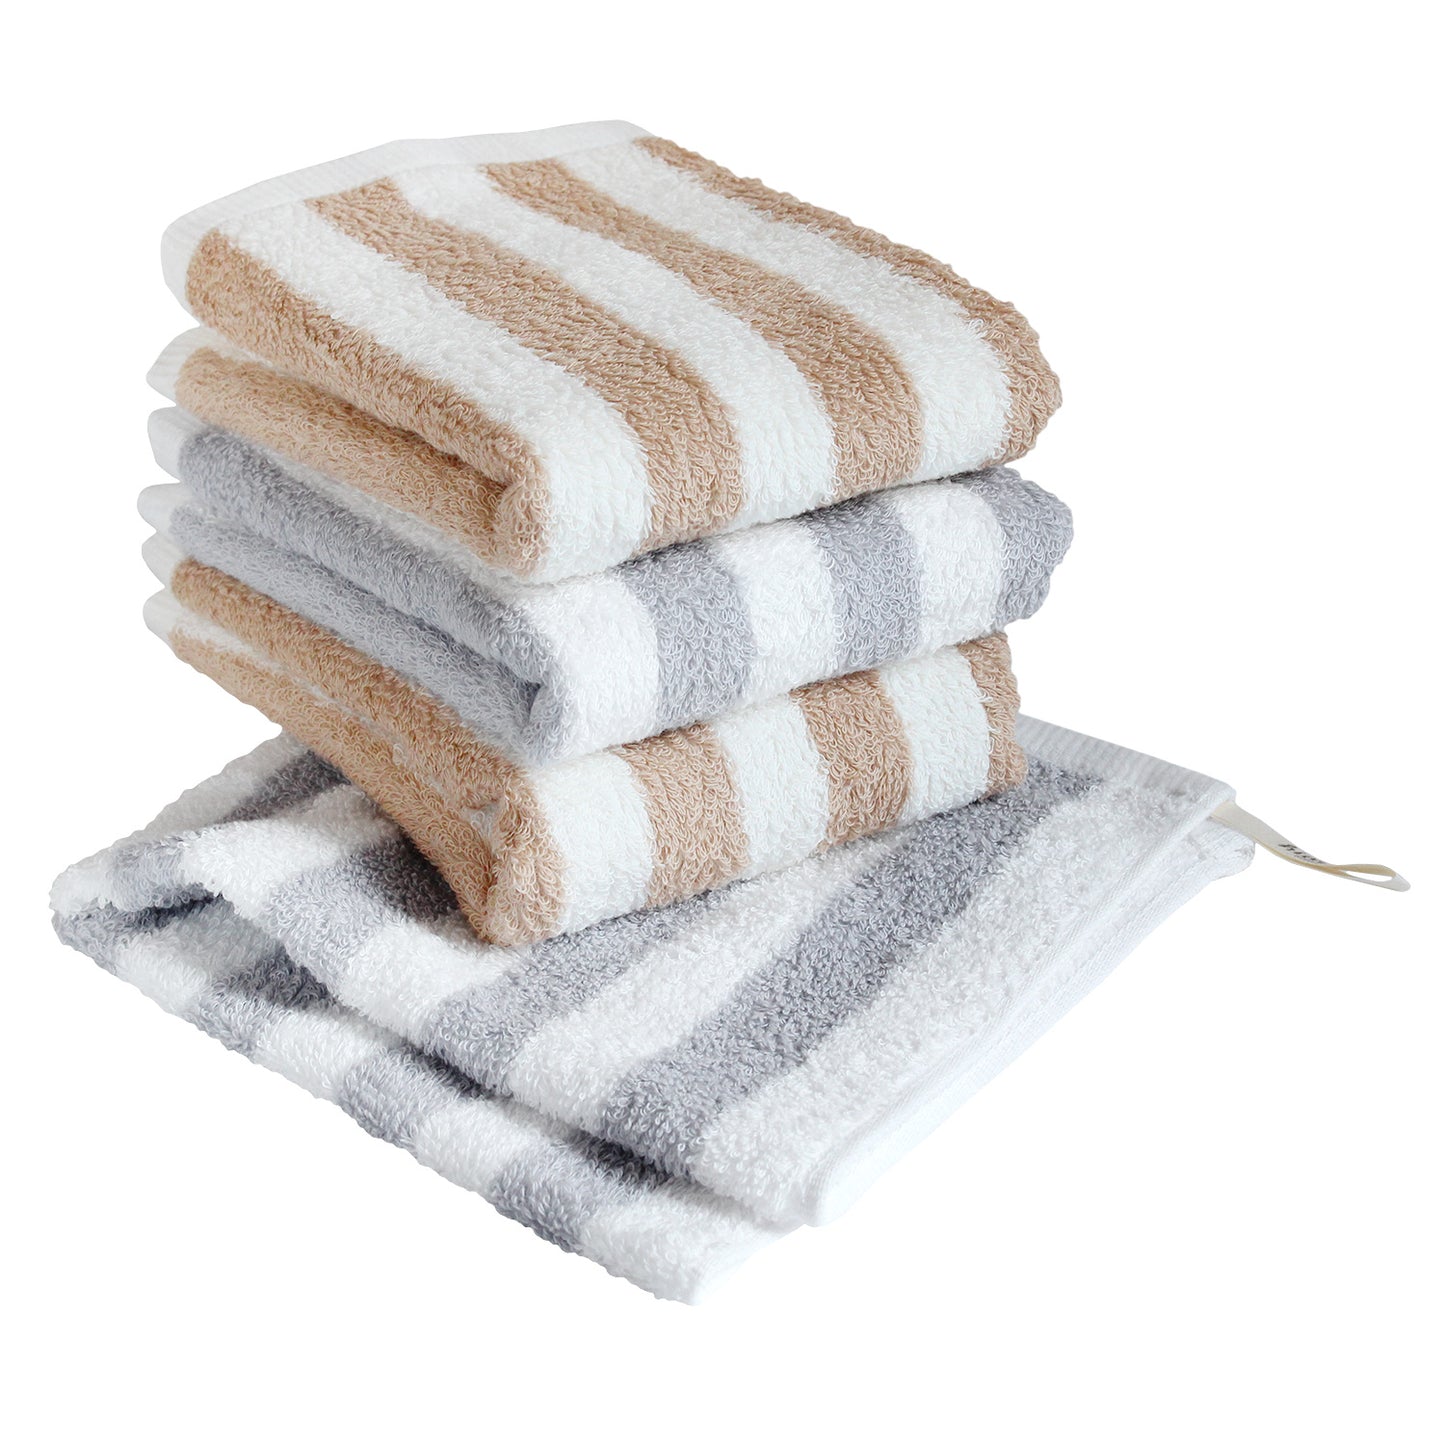 Hiorie Hotel Soft Stripe Water-Absorption Hand Towel 4 Sheets Cotton 100% Japan